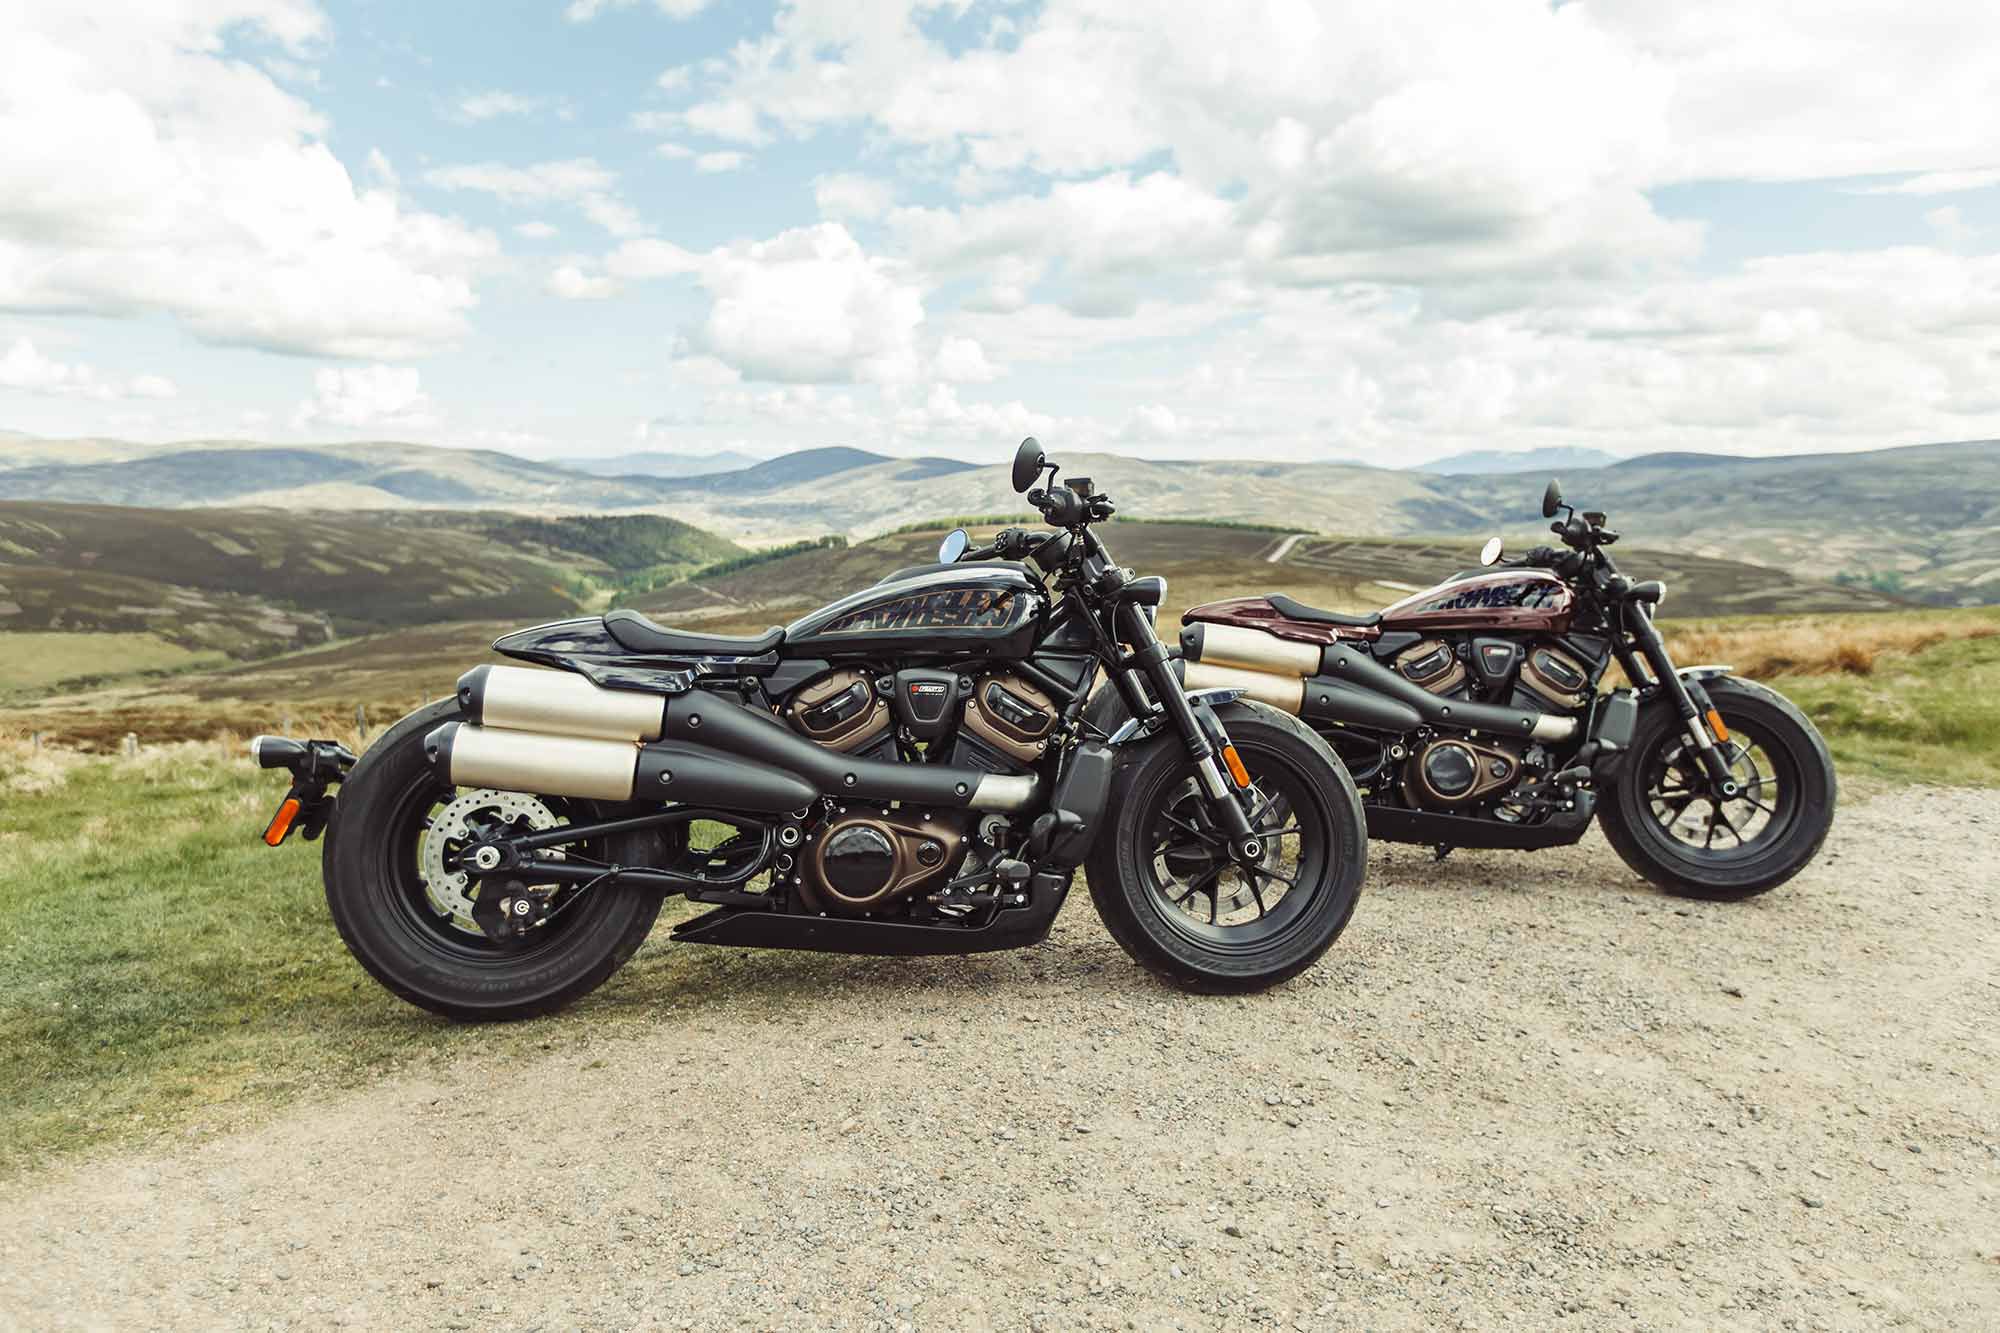 The Sportster S will start at $14,999.